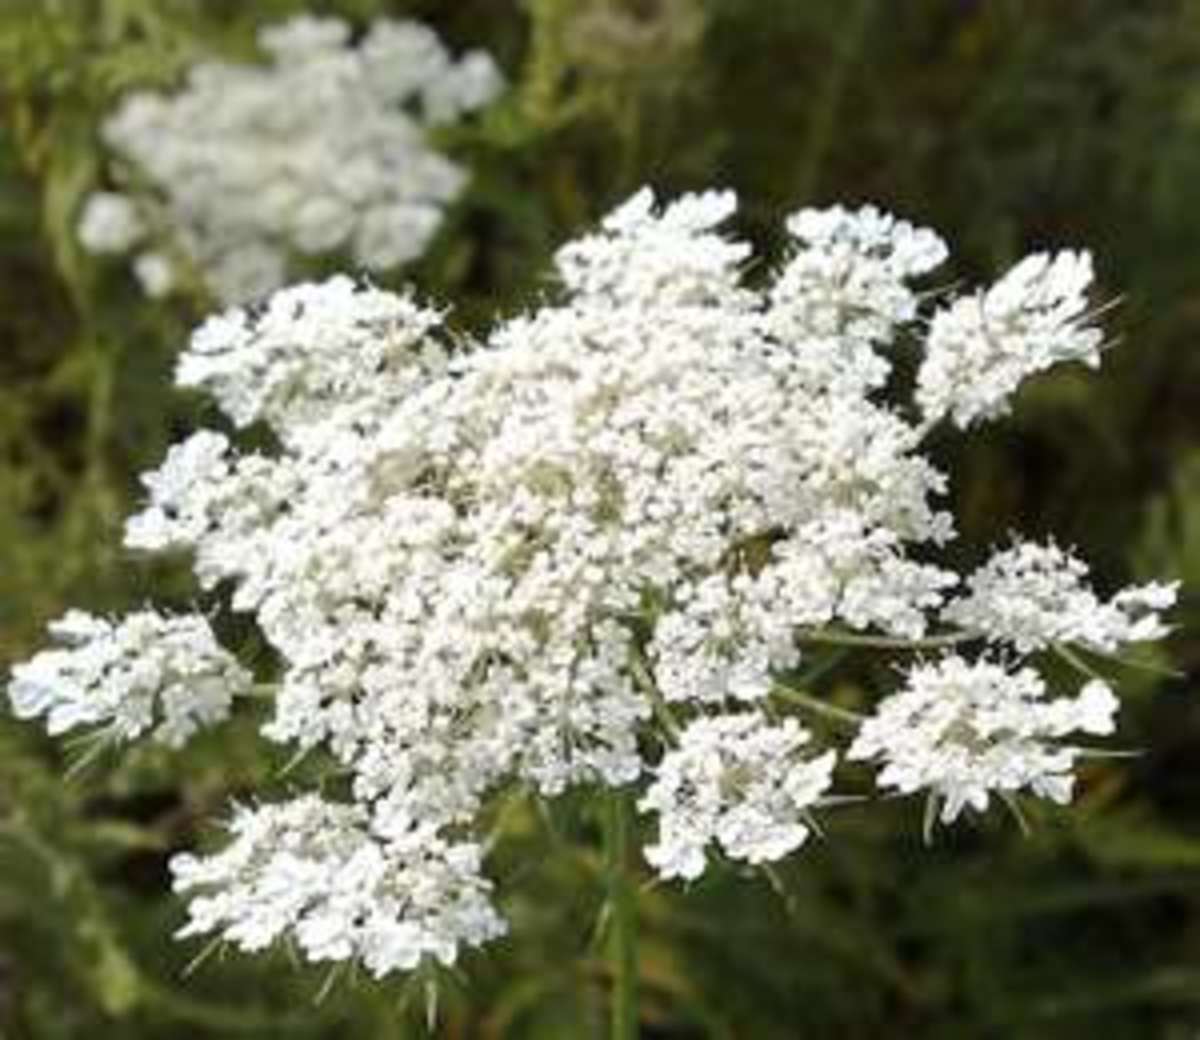 How to Grow and the Benefits of Queen Anne’s Lace